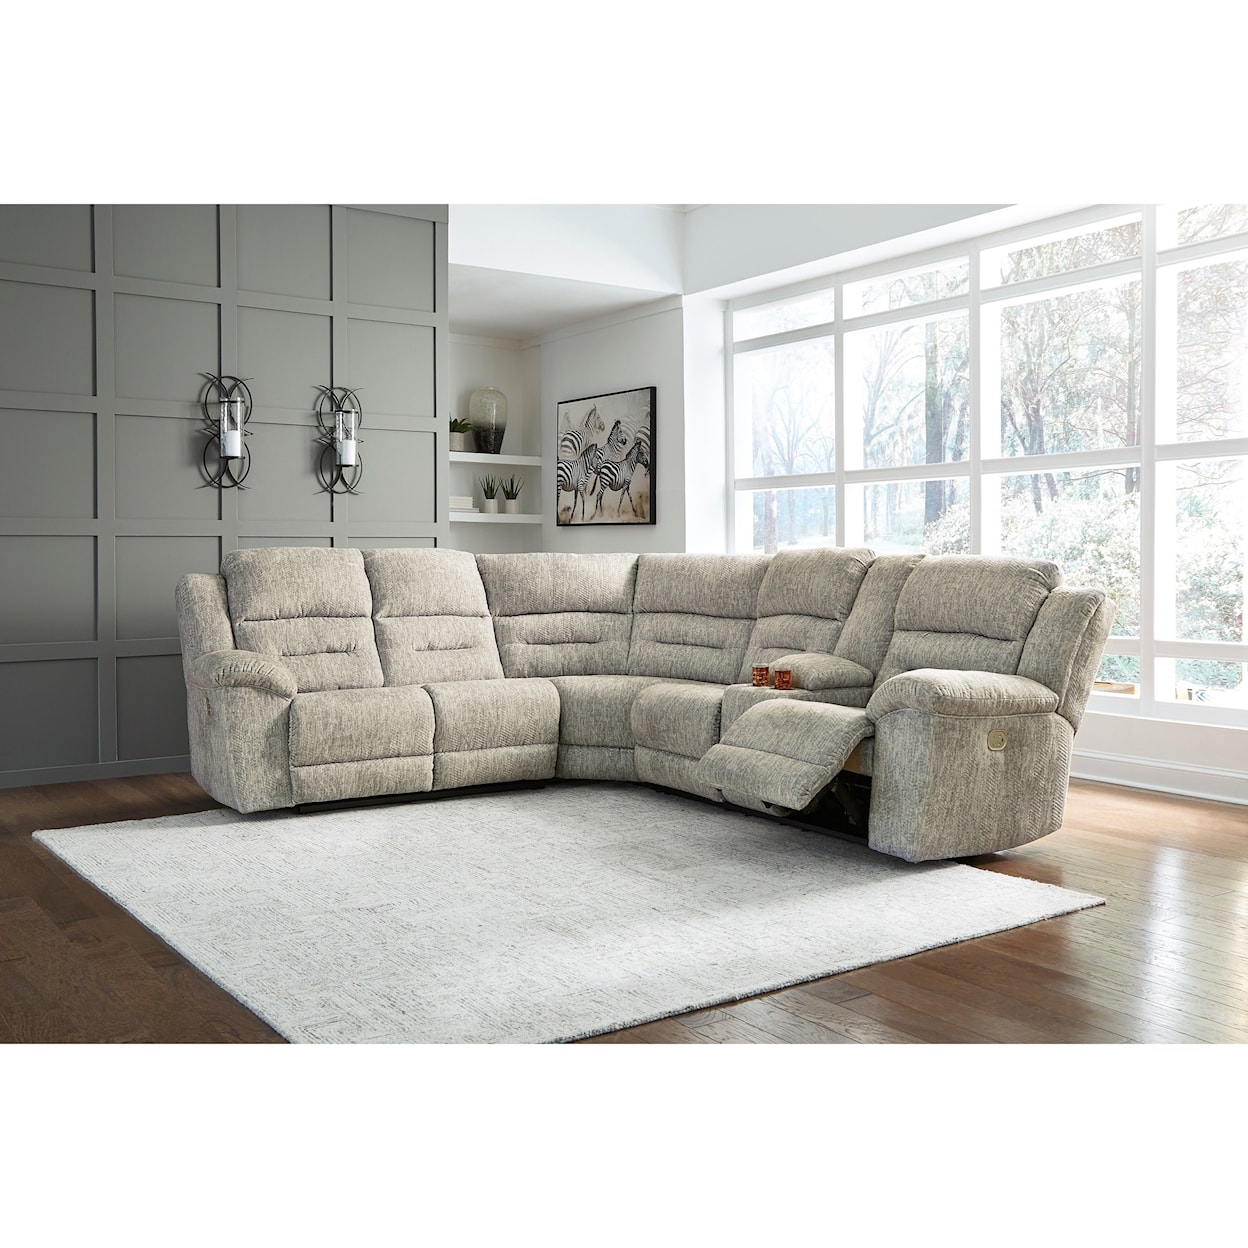 Ashley Furniture Signature Design Family Den Power Reclining Sectional